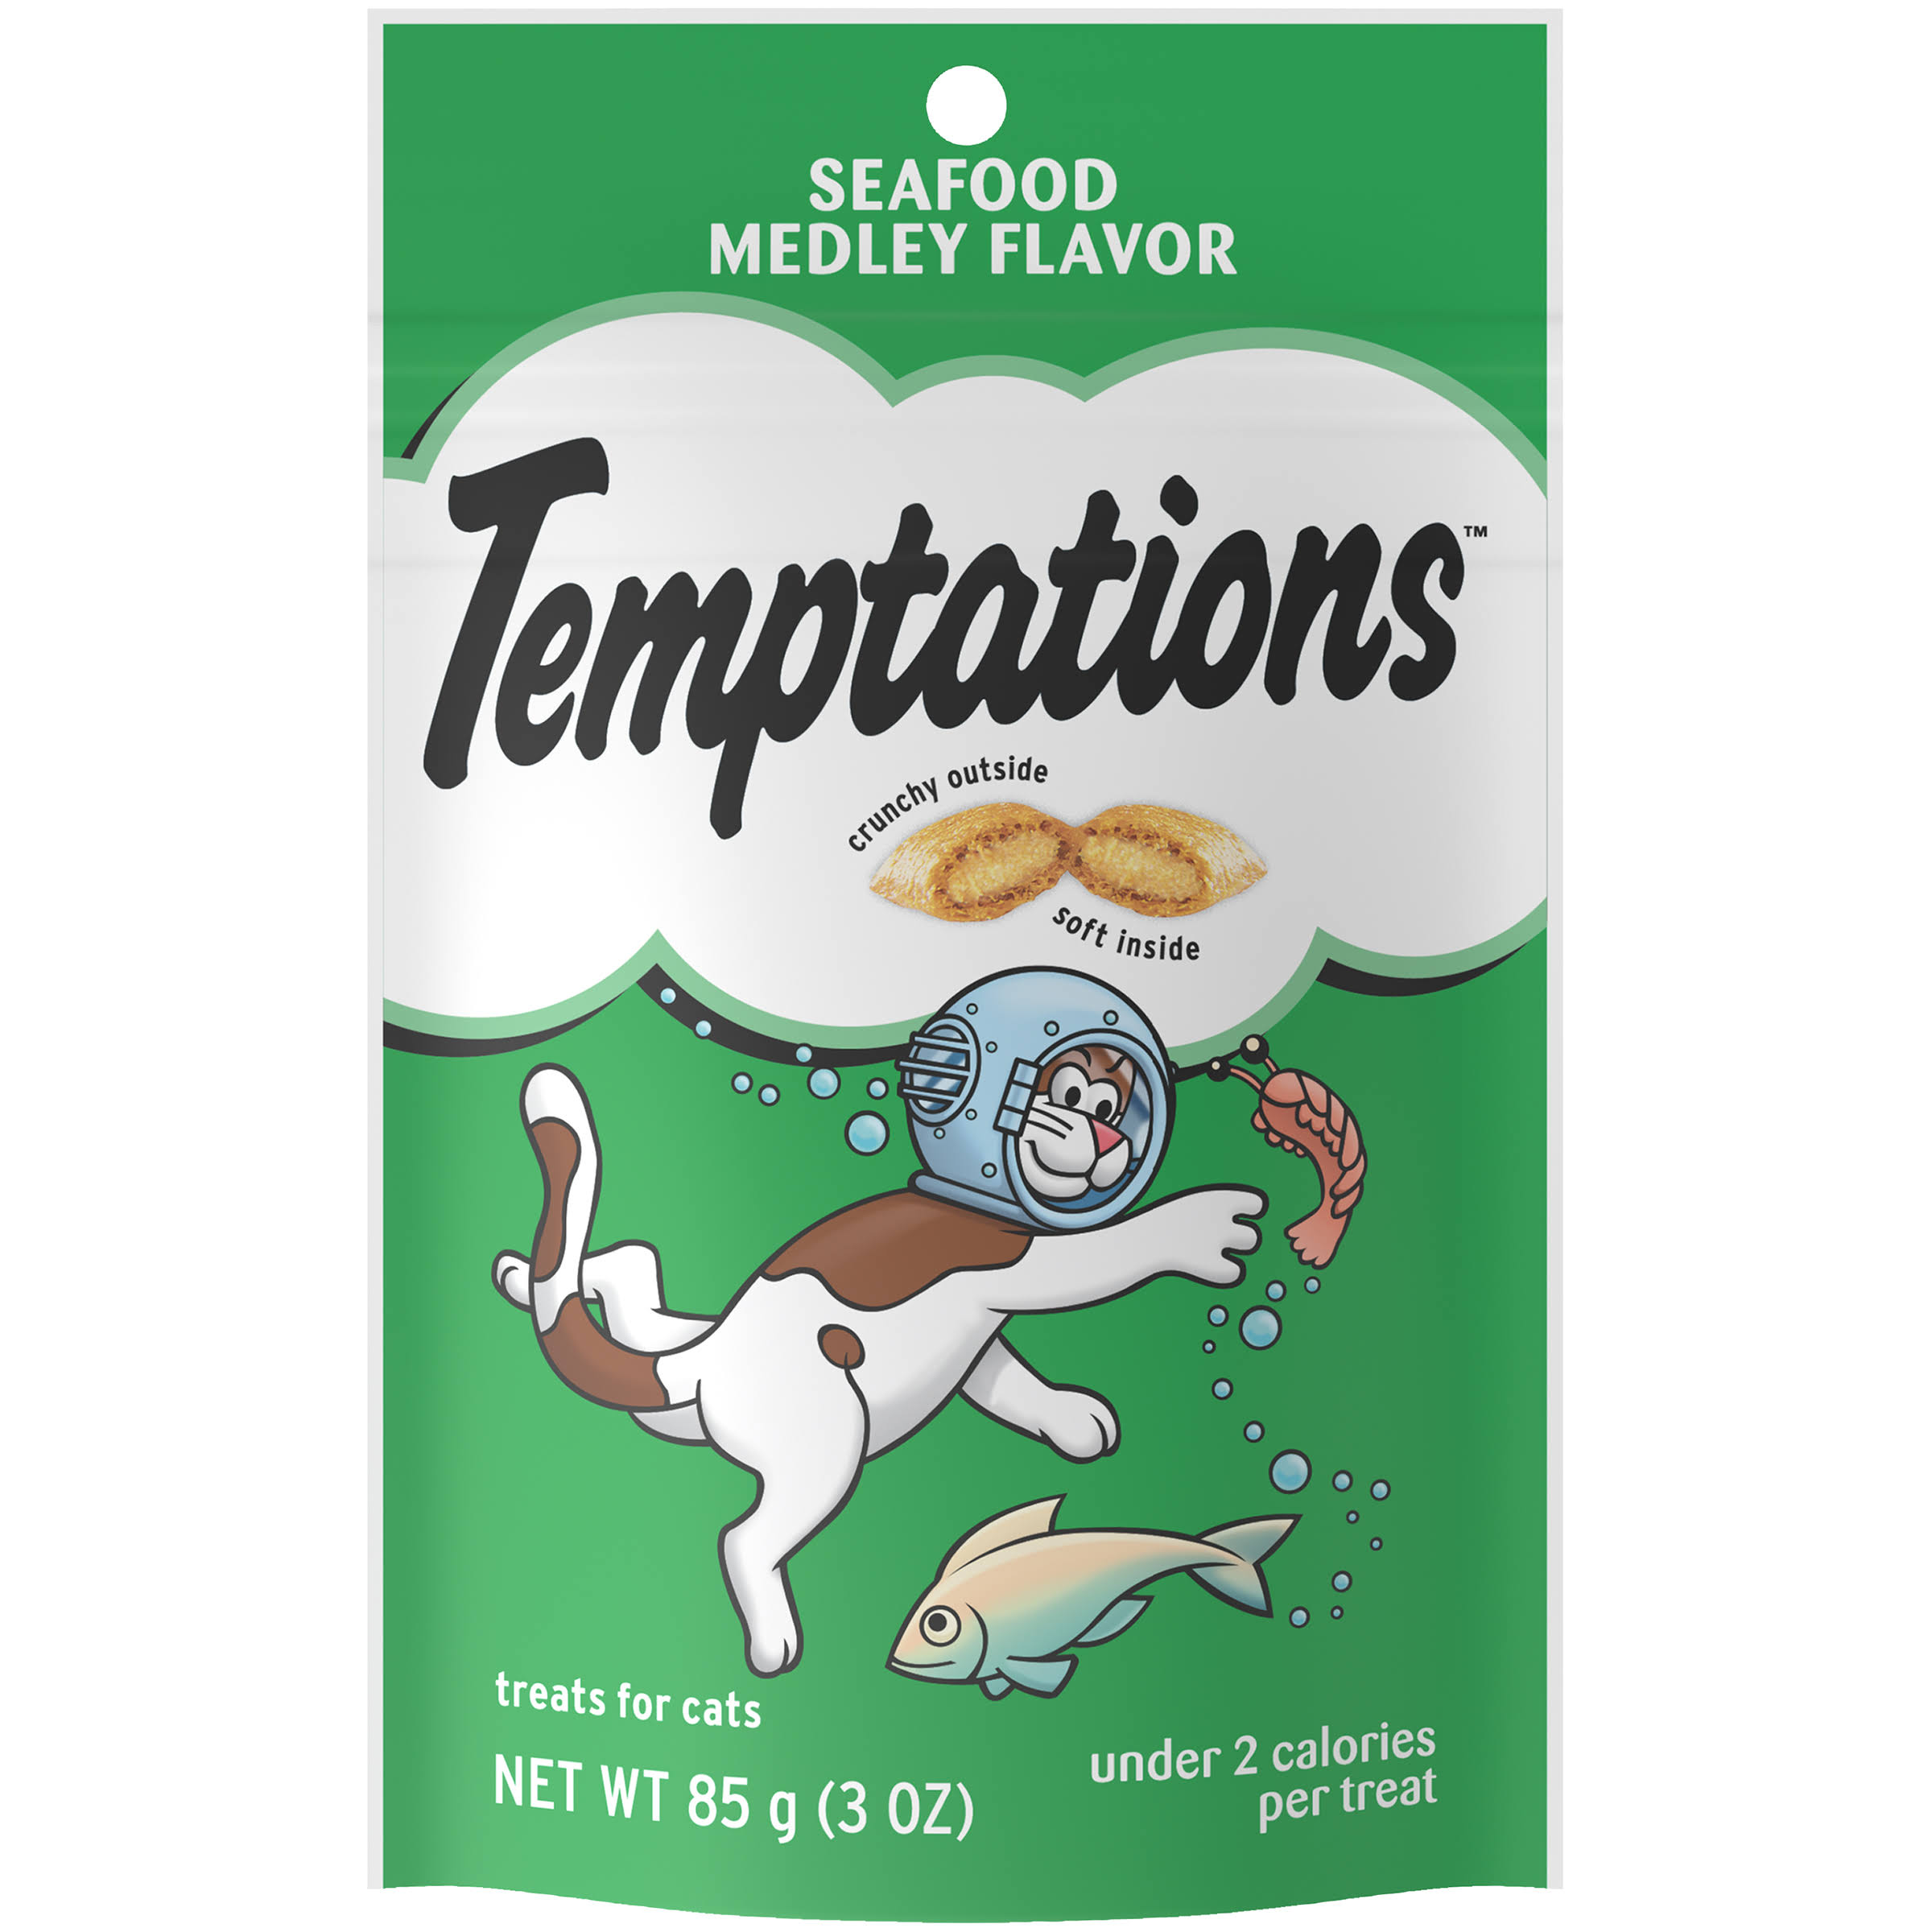 Temptation Treat for Cats - 3oz, Seafood